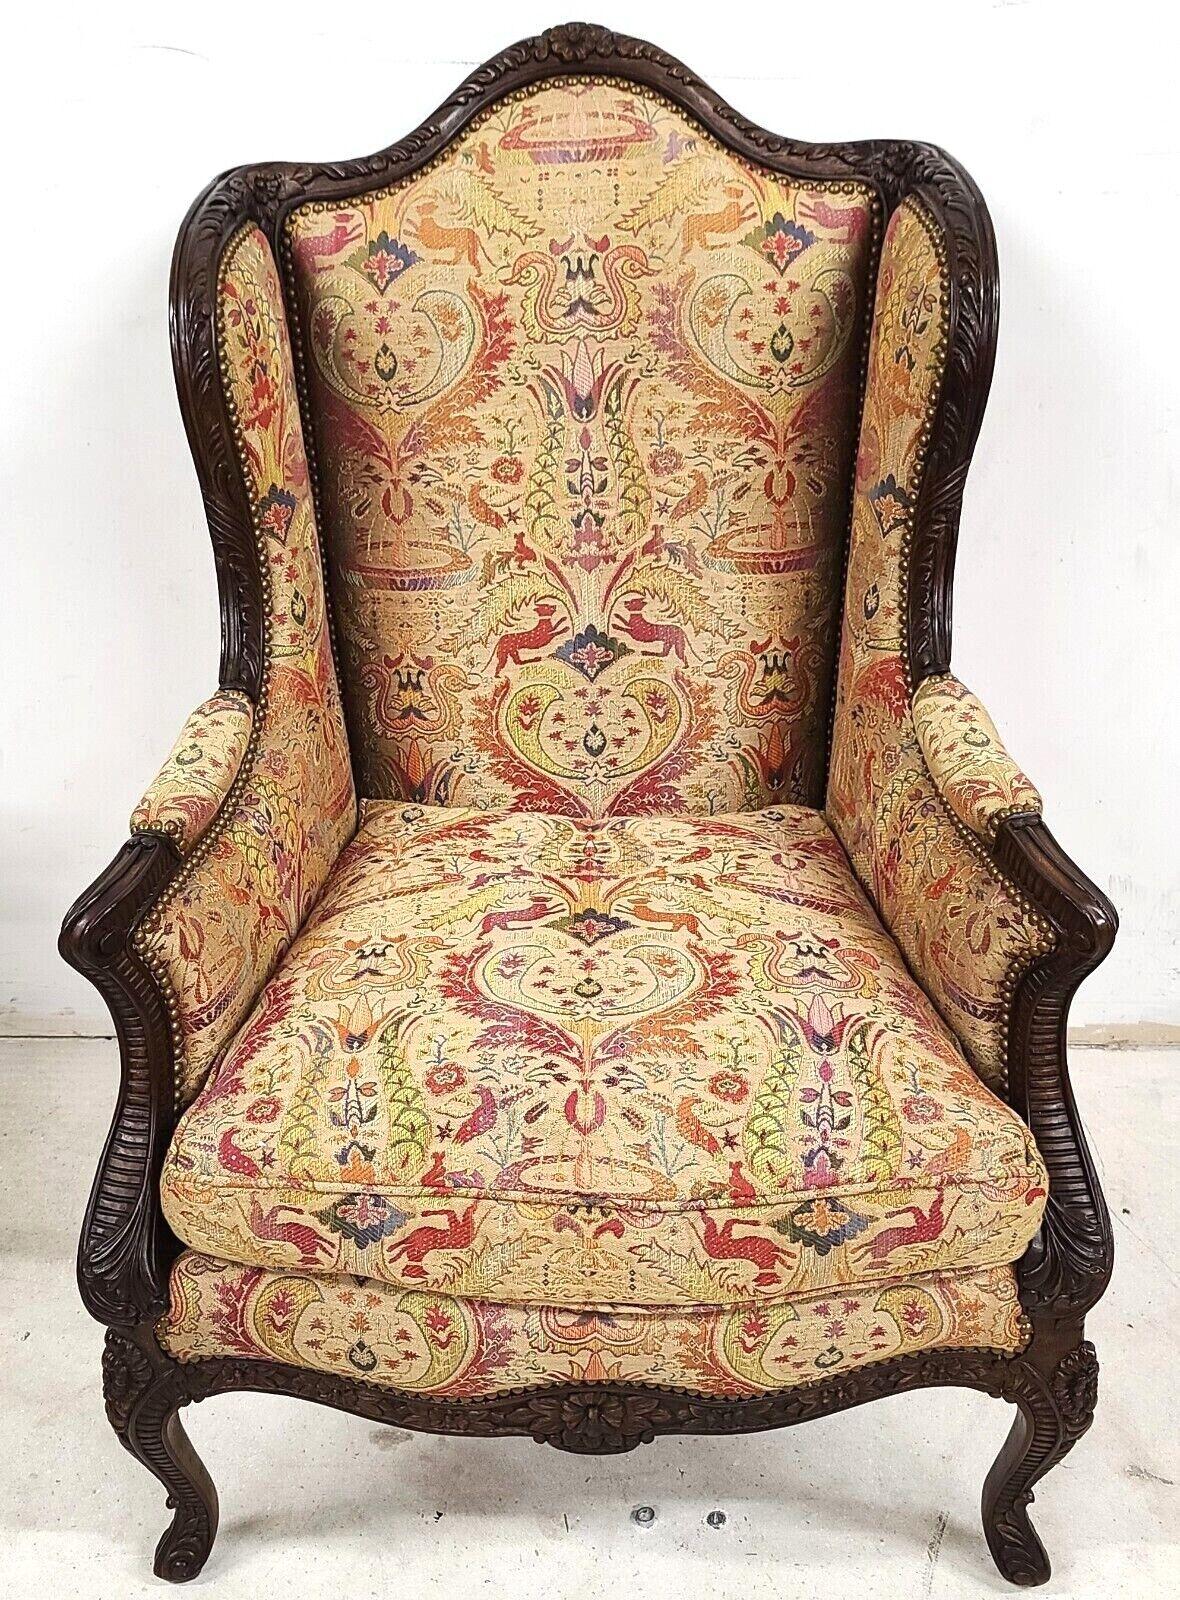 Offering One Of Our Recent Palm Beach Estate Fine Furniture Acquisitions Of A
Really Stunning Carved Walnut French Wingback Library Reading Chair by E J VICTOR
Featuring detail carvings, a matching bolster pillow, and a down and foam cushion